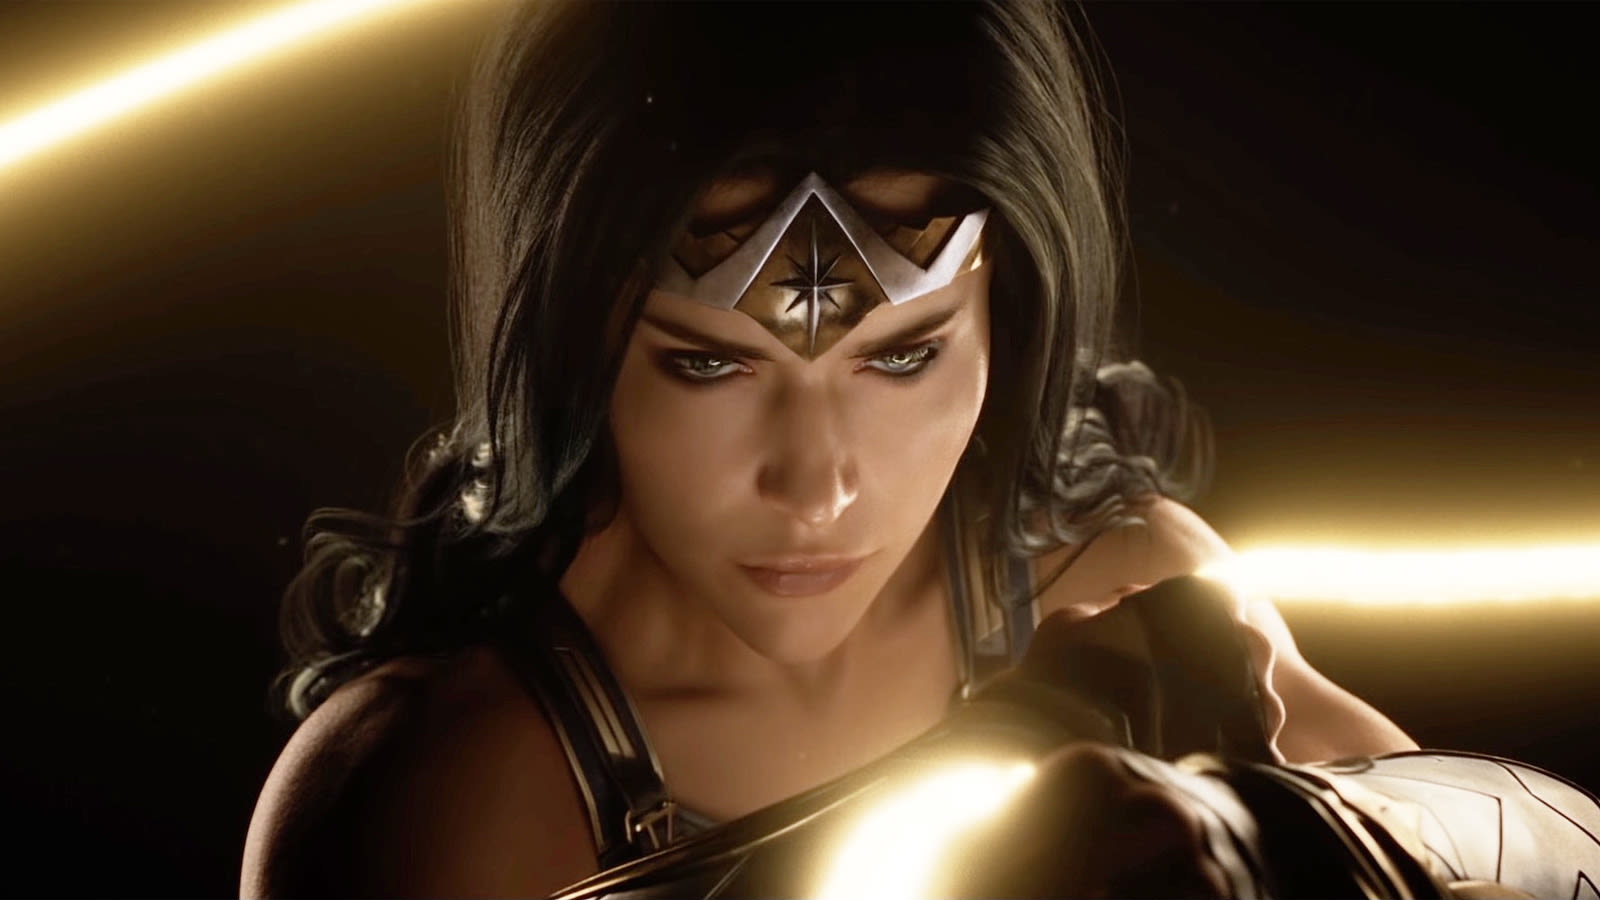 Wonder Woman Game from Monolith Reportedly “Troubled,” Unlikely to be Shown Soon